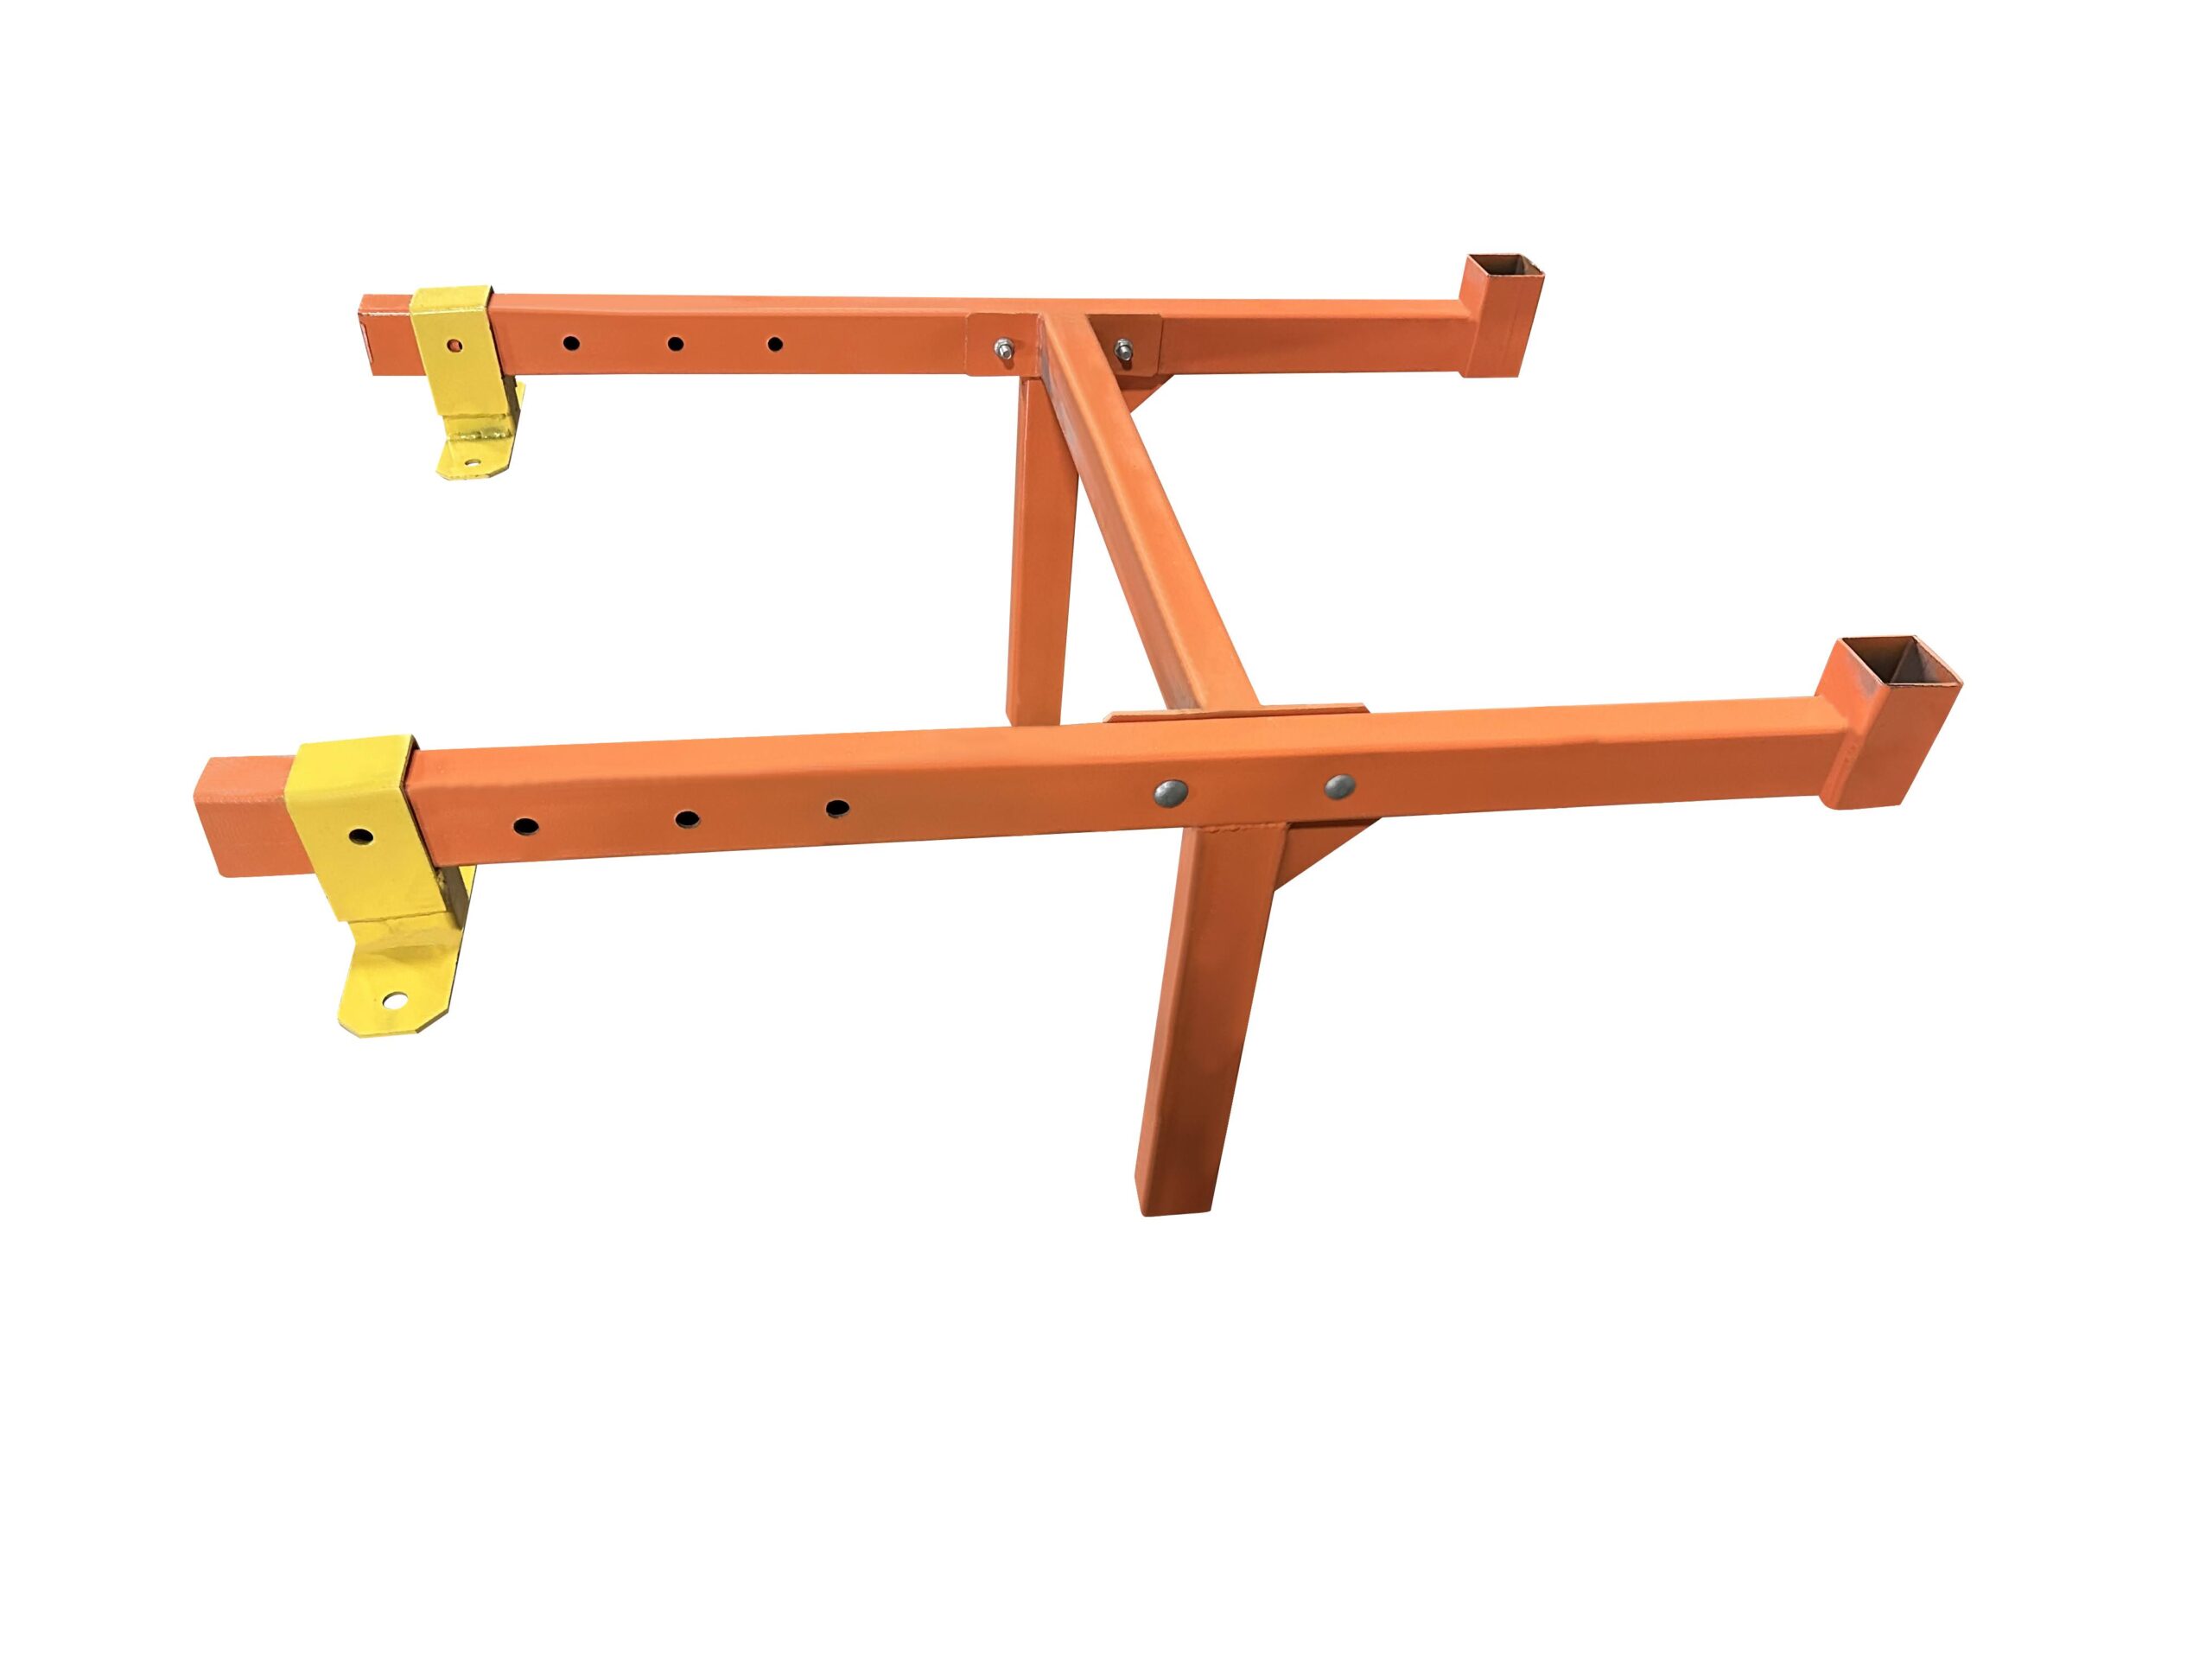 anchor roof,roof anchor,temporary roof anchor system,support frame, basic support frame,window anchor,scaffold anchor,pitched roof outrigger,flat roof outrigger,window parapet outrigger set